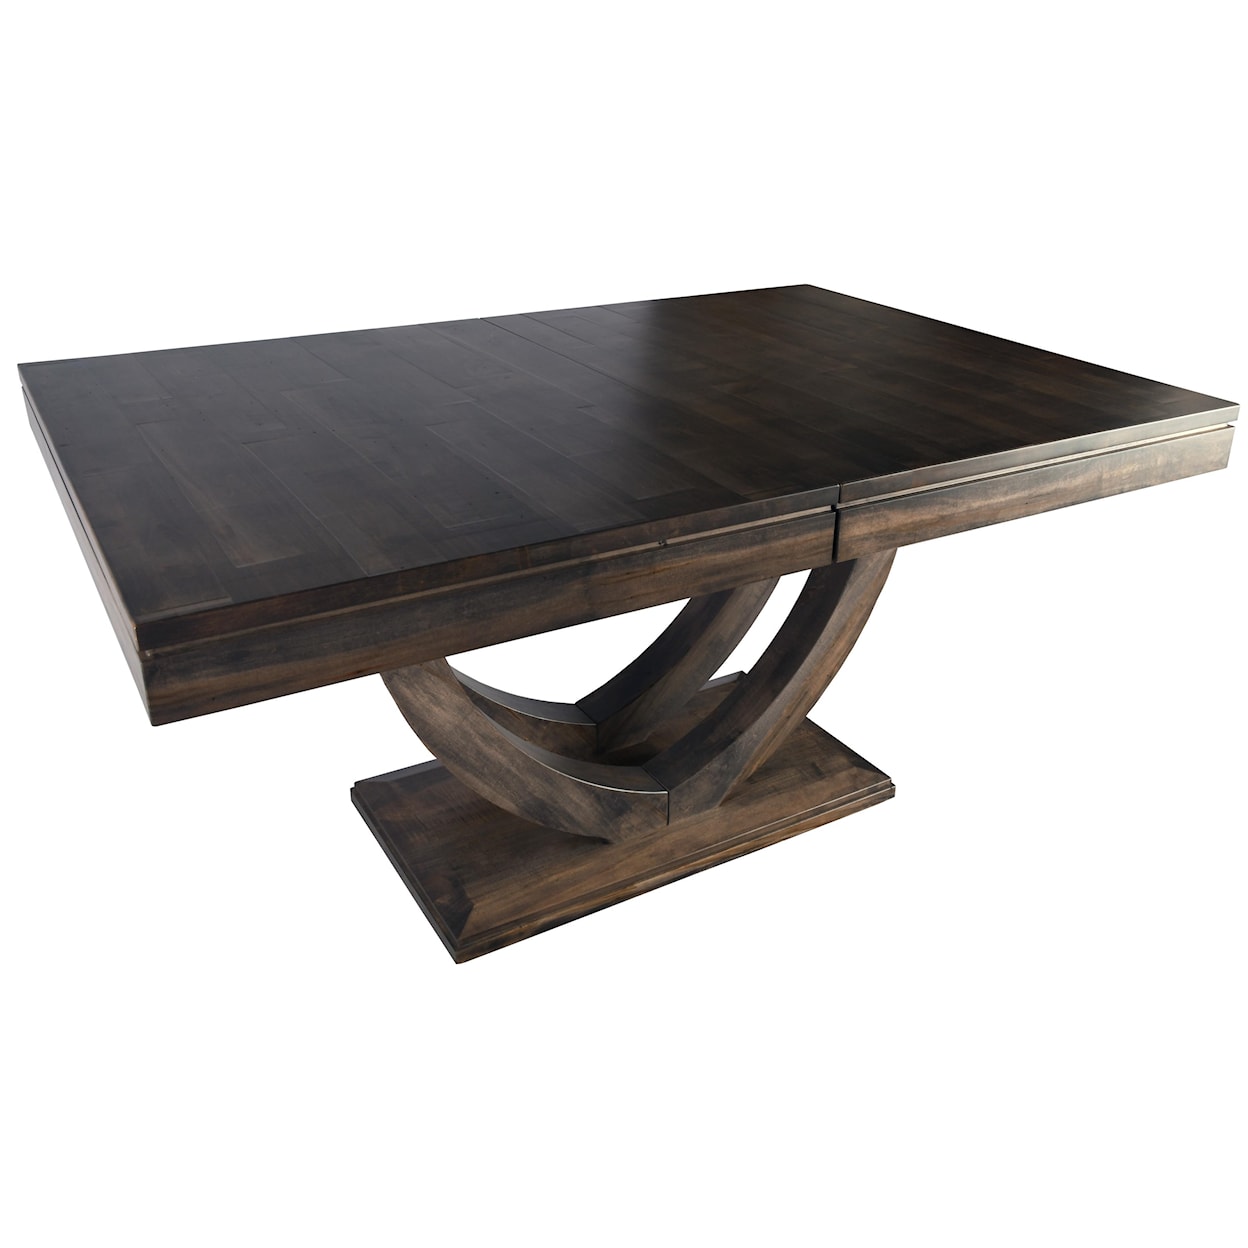 Handstone Contempo Solid Wood Dining Table